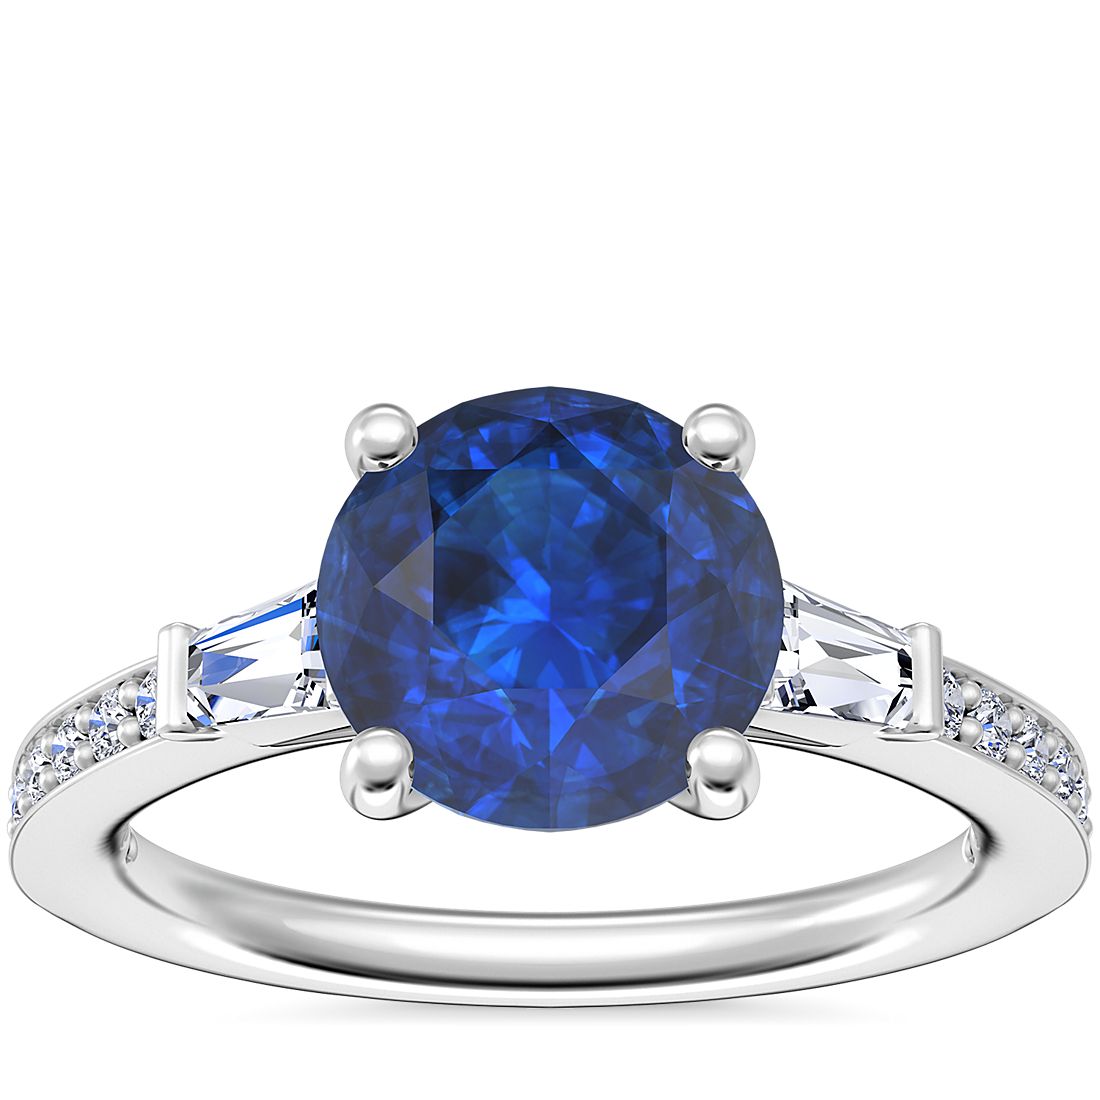 Tapered Baguette Diamond Cathedral Engagement Ring with Round Sapphire in 14k White Gold (8mm)